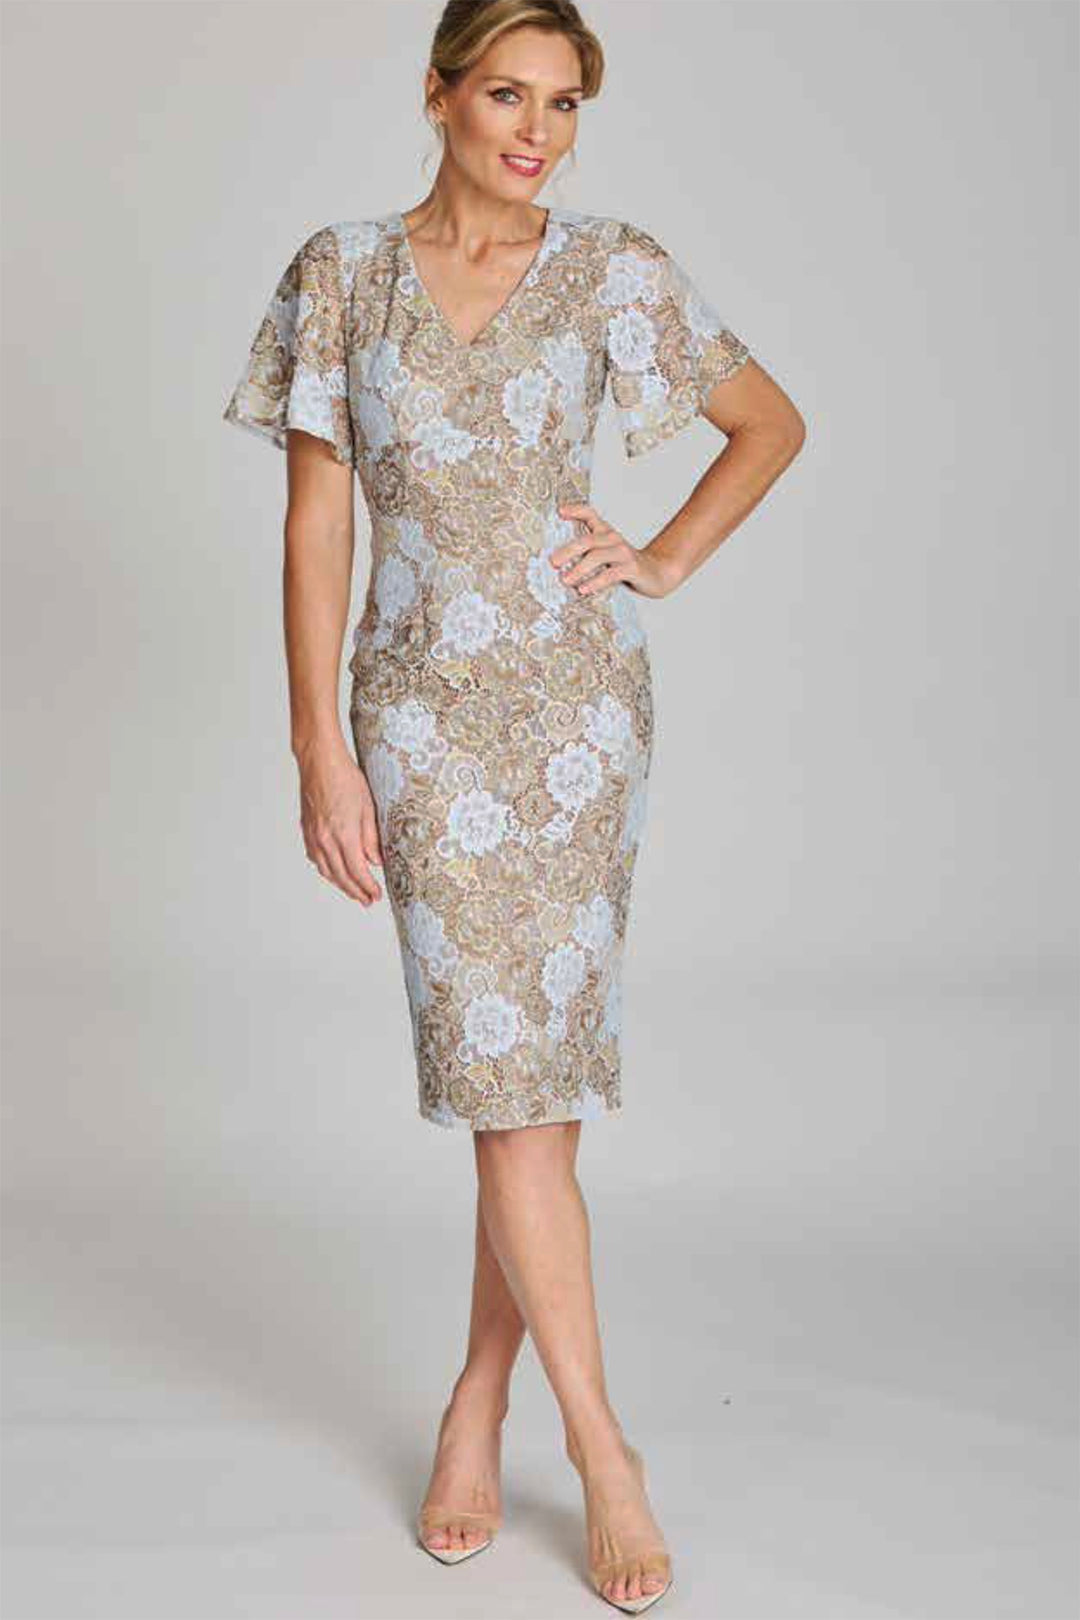 Front View of a lady with a V-neck in a delicate lace dress and flowing sleeves in a midi length designed by Pink Ruby and purchased from PIzazz Boutique Nelson Bay dress shops